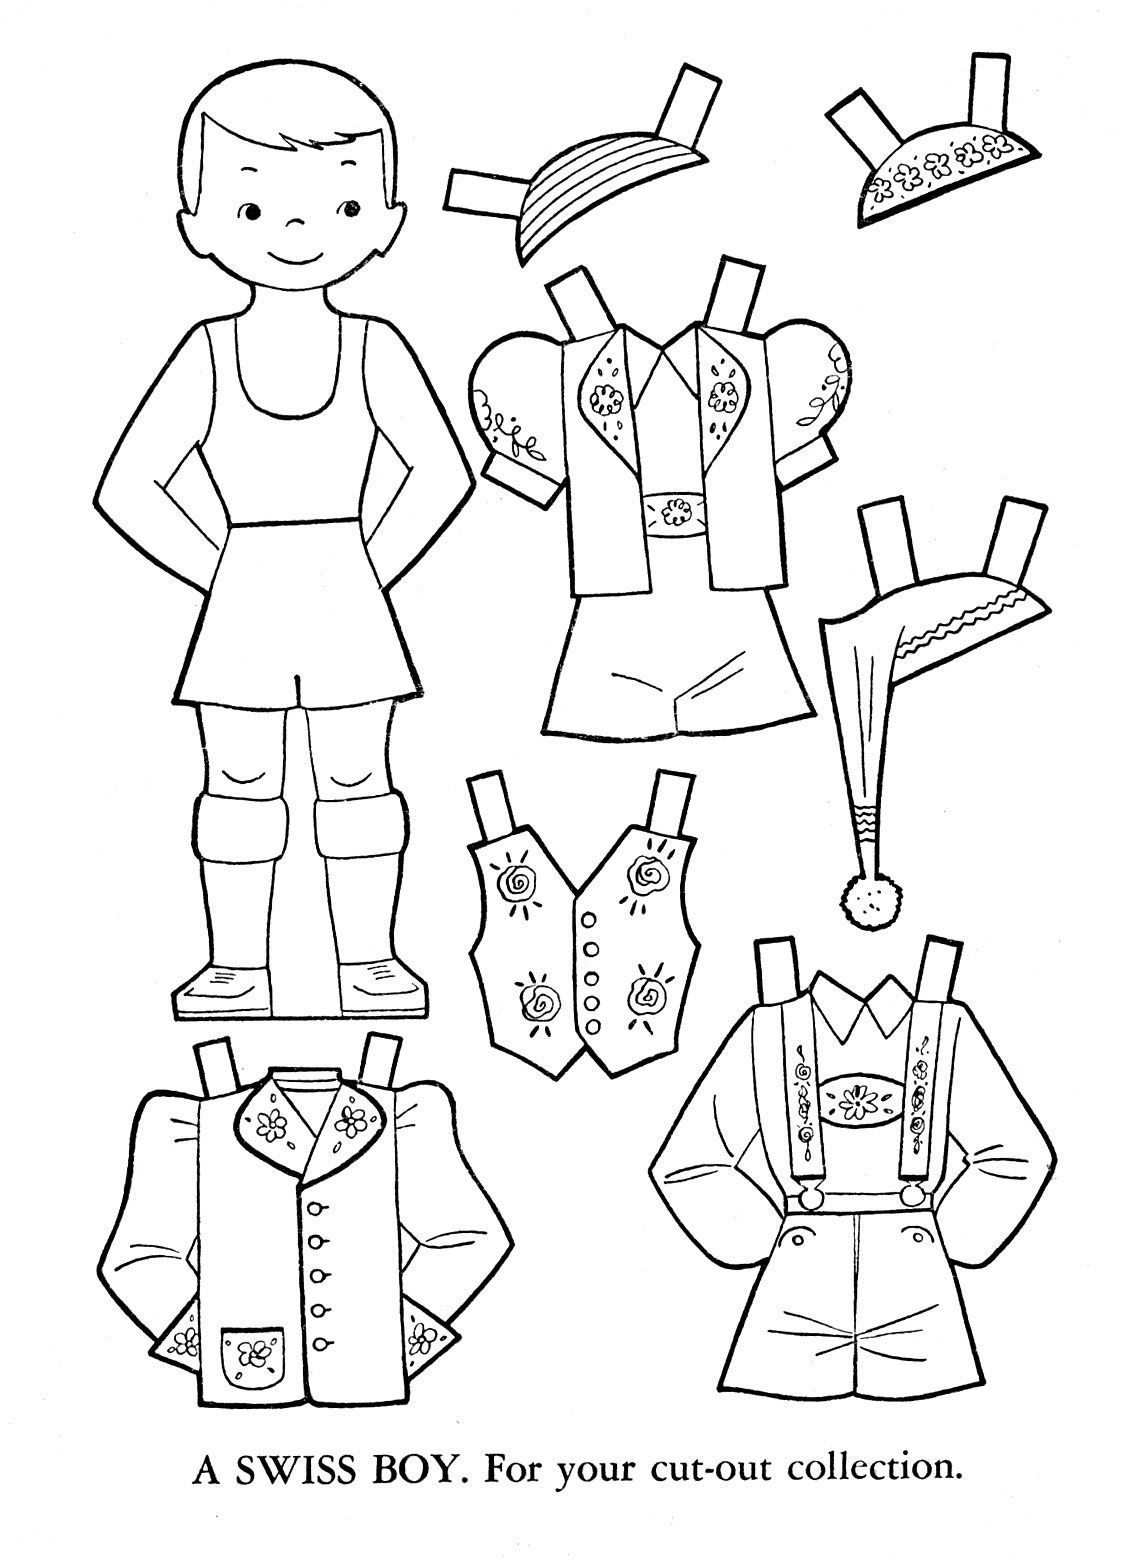 Outlines Of Dress Up Dolls Different Colountries | Paper Doll Black - Free Printable Paper Dolls From Around The World